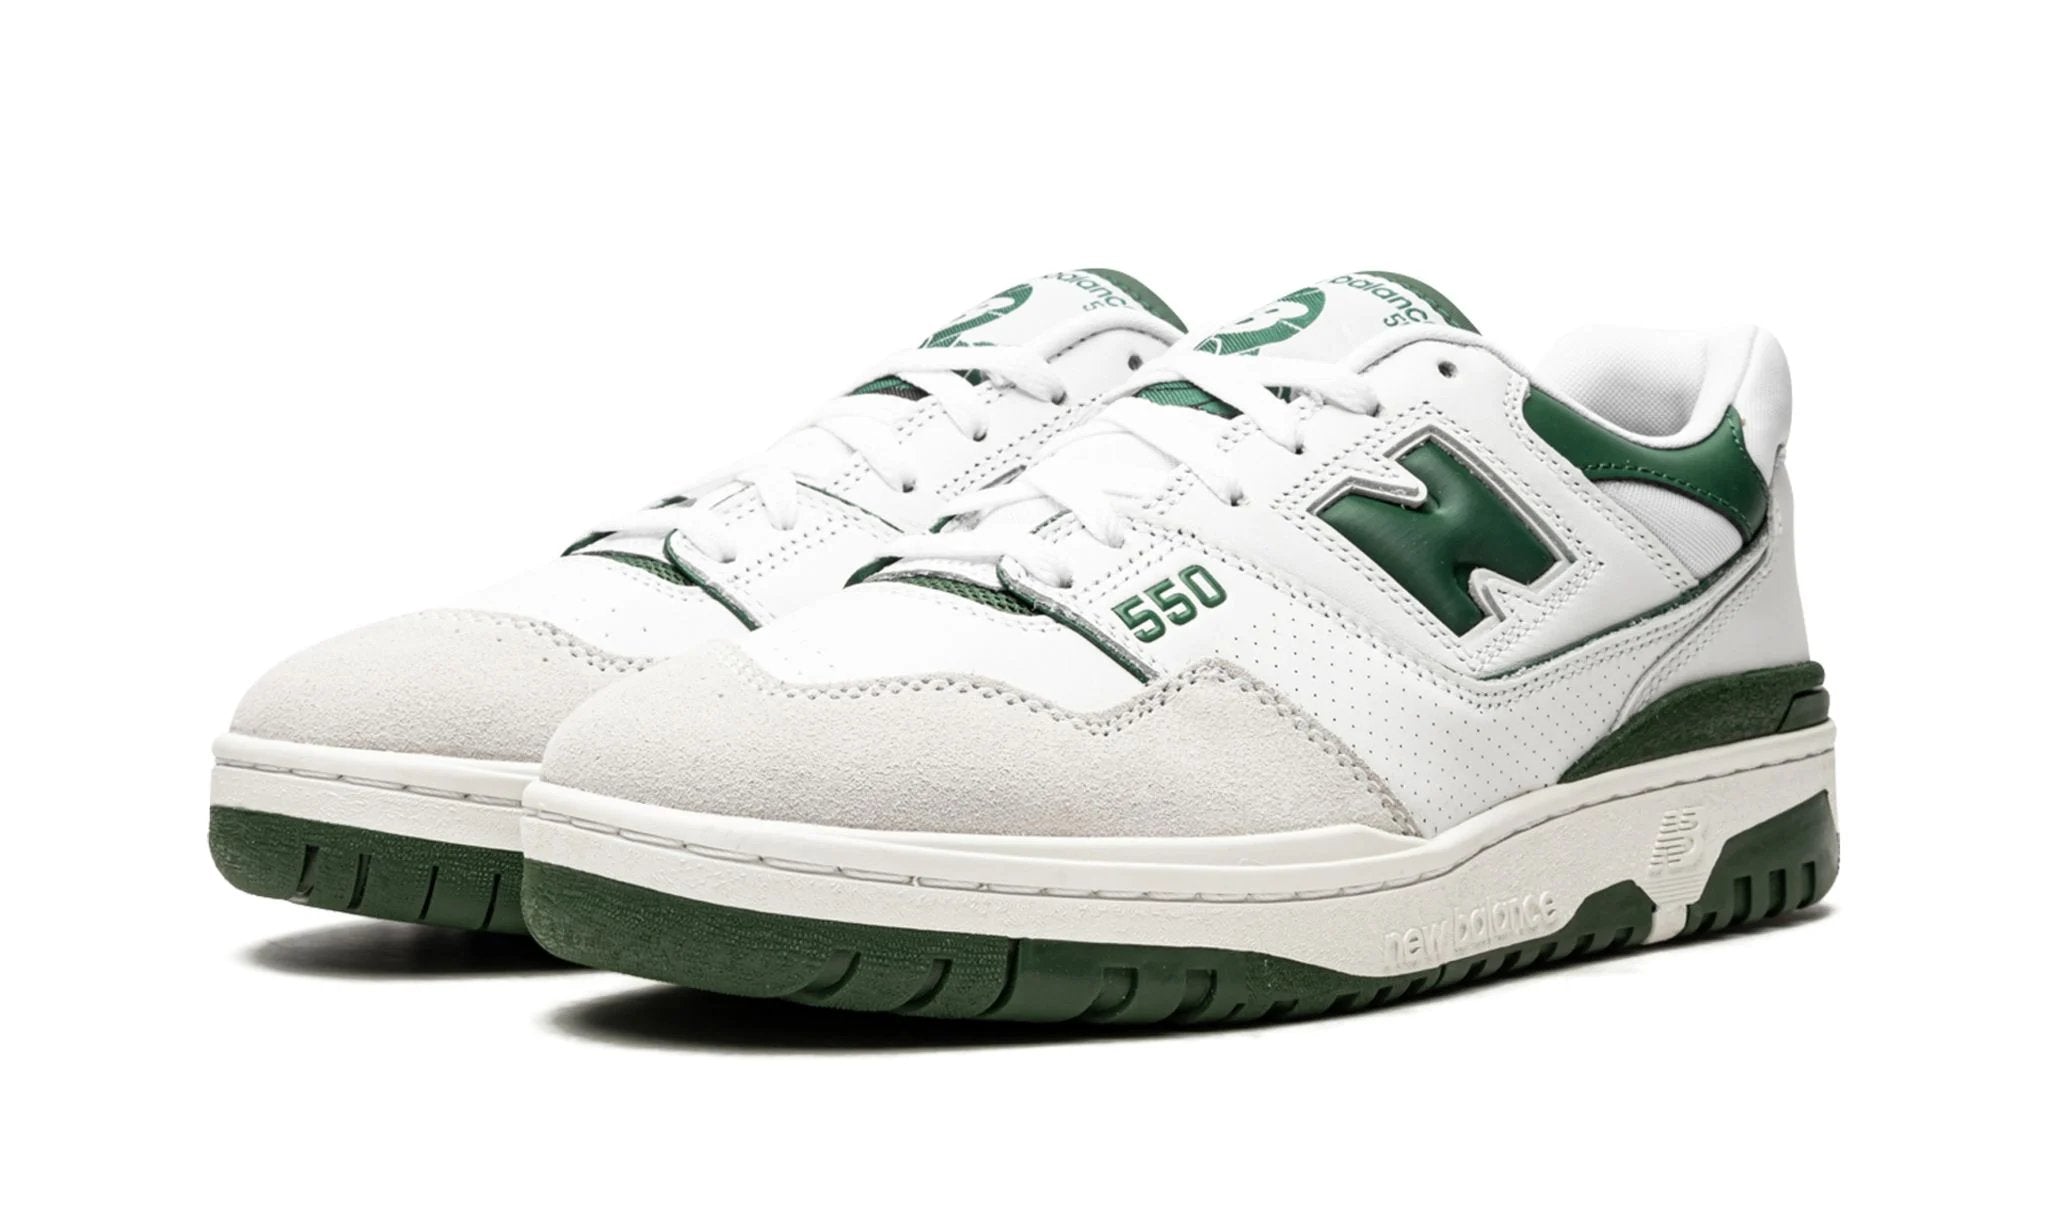 New Balance 550 White Green - BB550WT1 - Sneakers